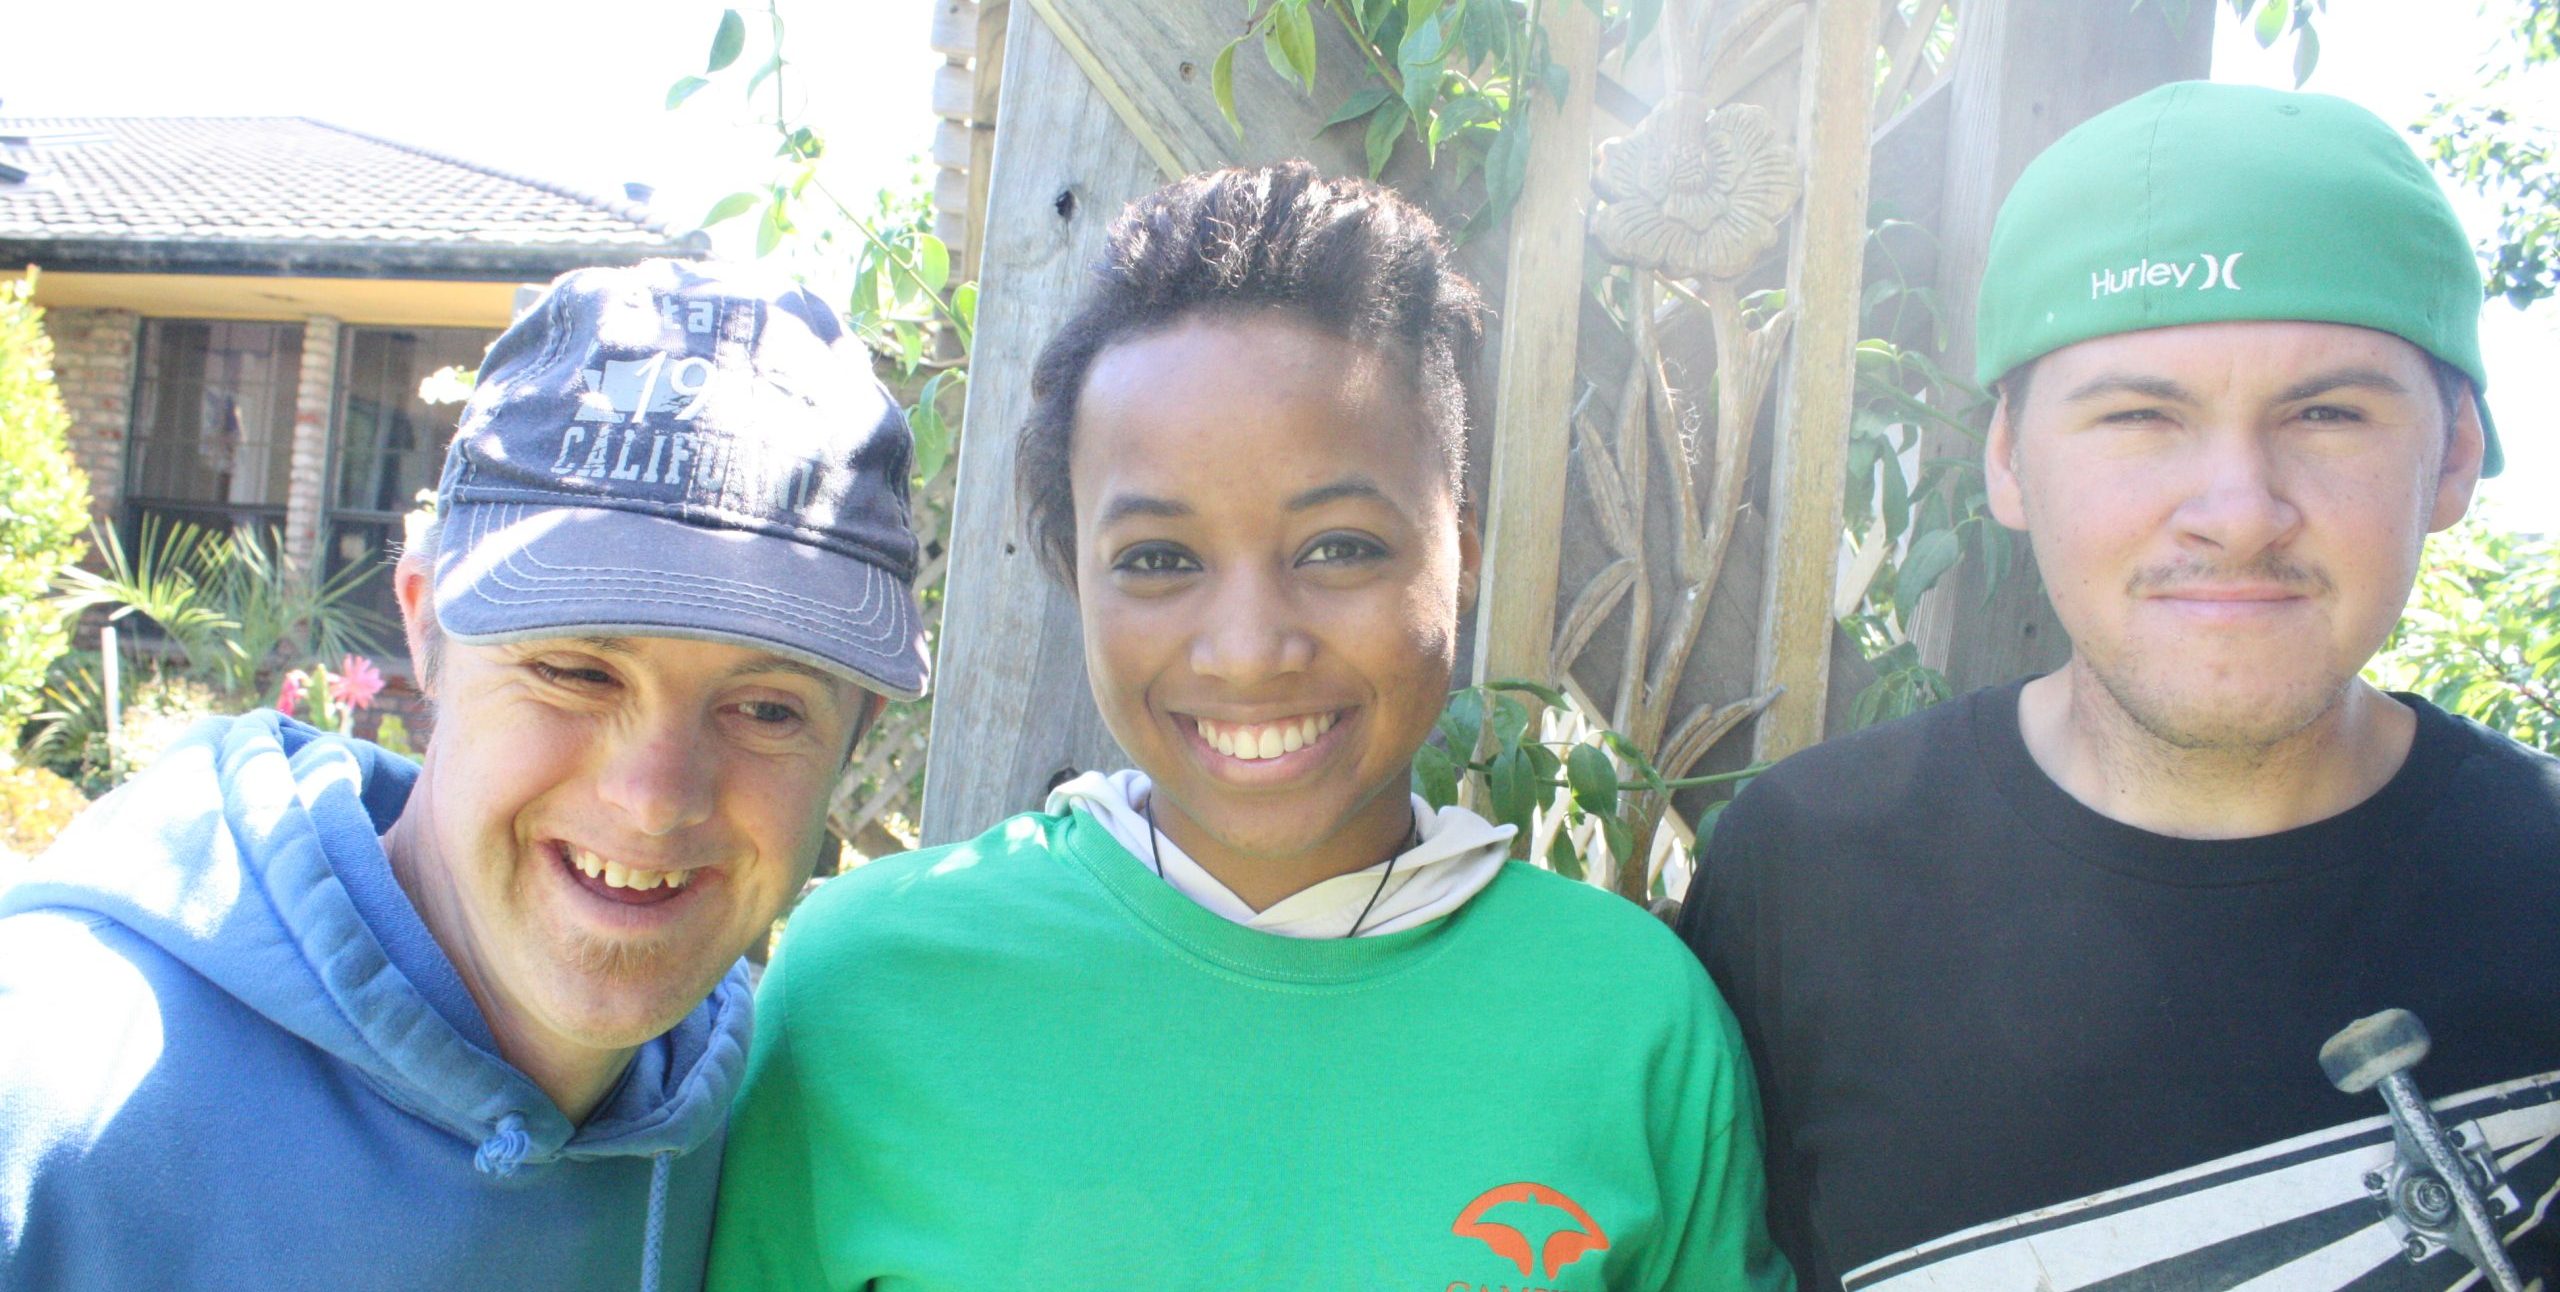 Brittany smiles while standing between two friends at Camphill. They all have their arms around each other. On the left is a friend wearing a blue hoodie and a blue baseball cap. On her right is a friend wearing a black shirt with a skateboard on it and a green baseball cap worn backwards. Brittany is wearing a green camphill t-shirt over a white hoodie.